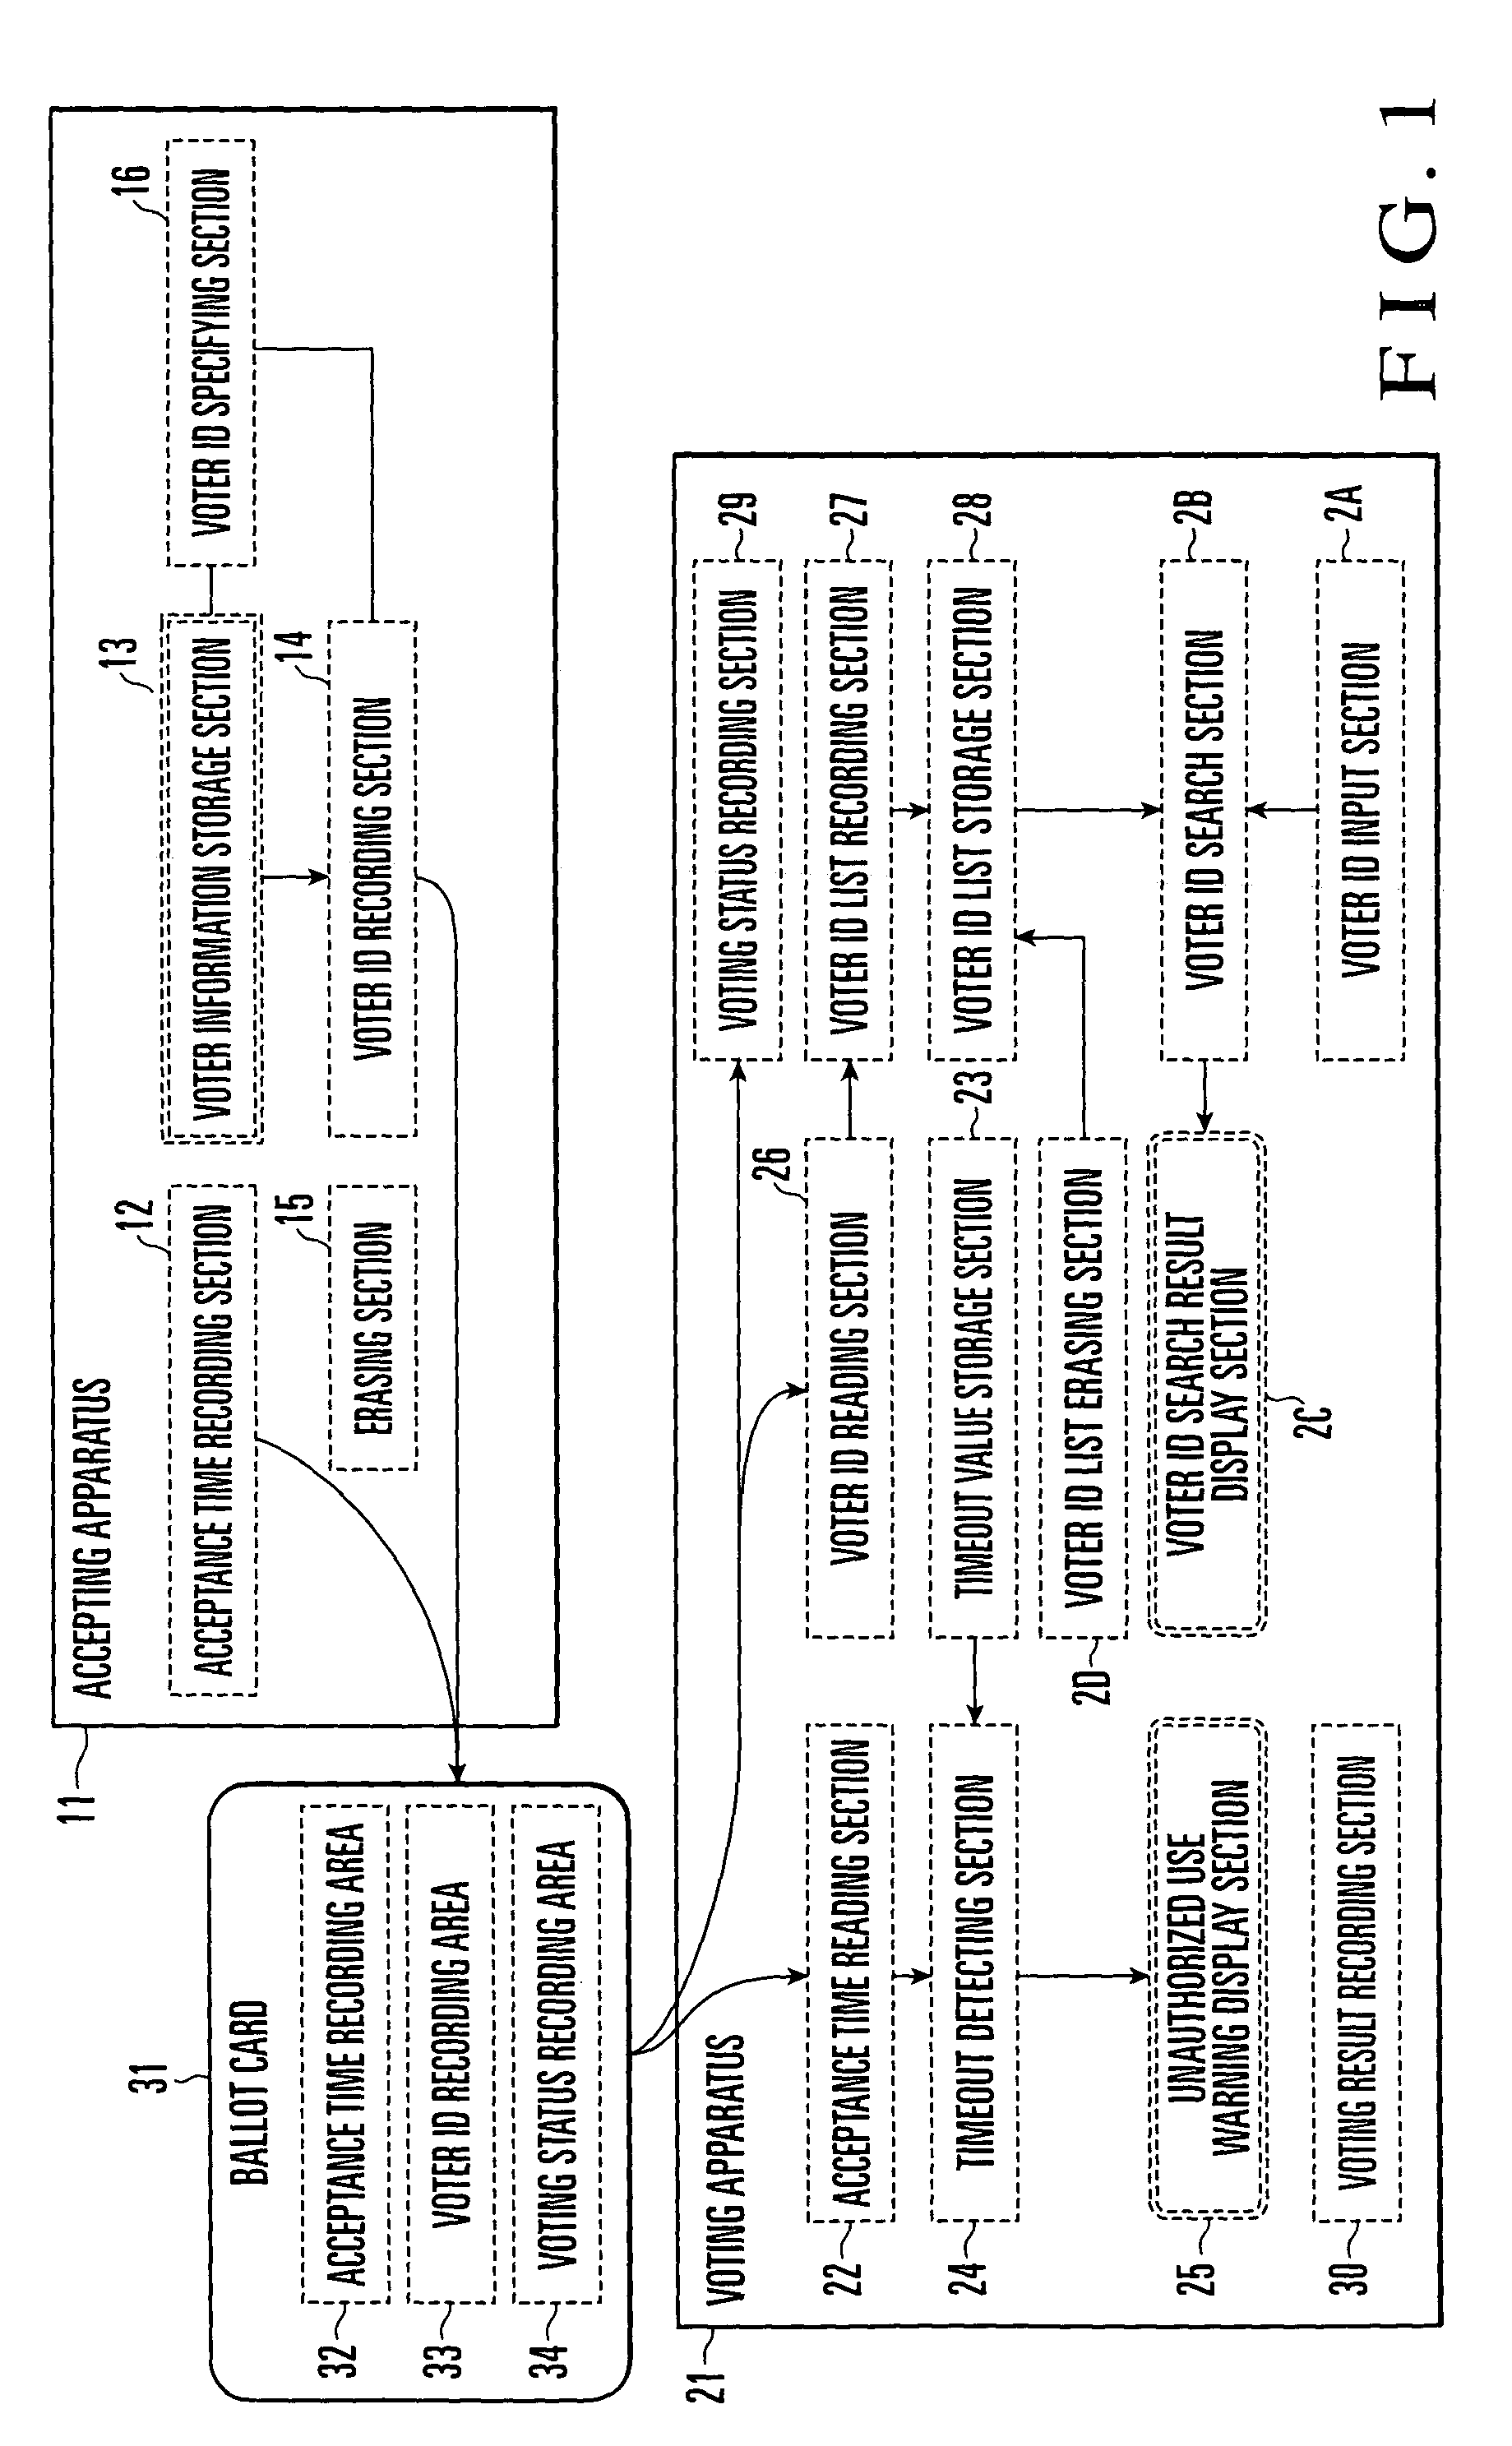 Electronic voting system and method of preventing unauthorized use of ballot cards therein